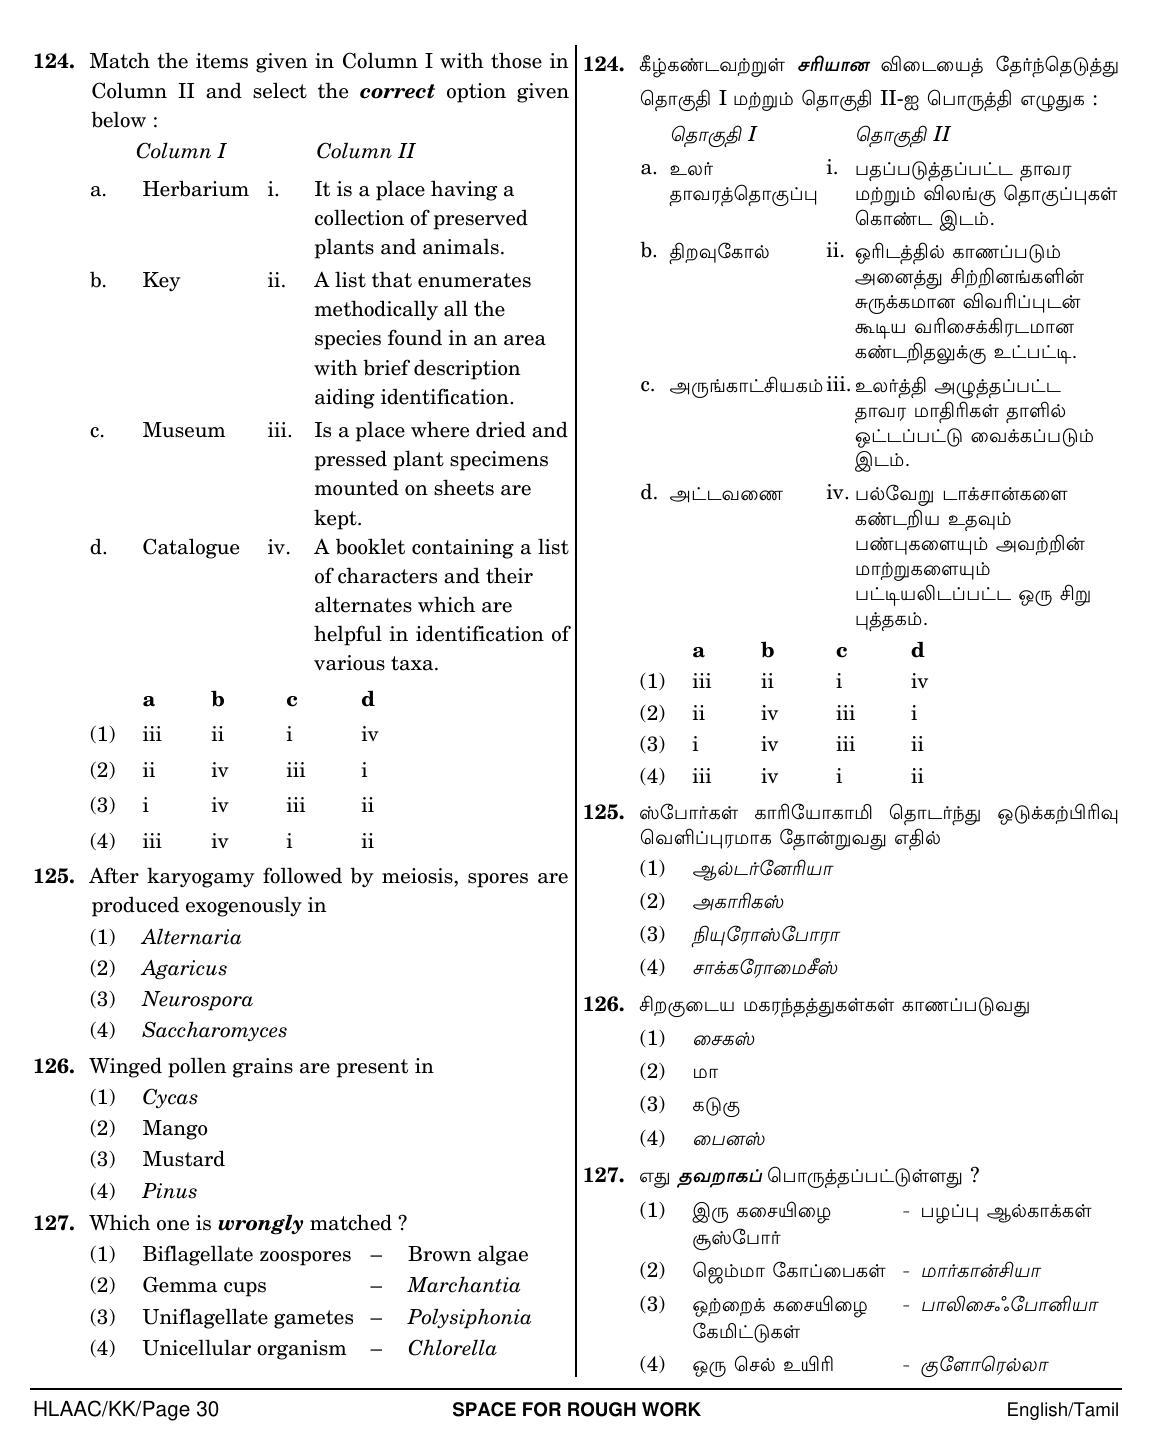 NEET Tamil KK 2018 Question Paper - Page 30